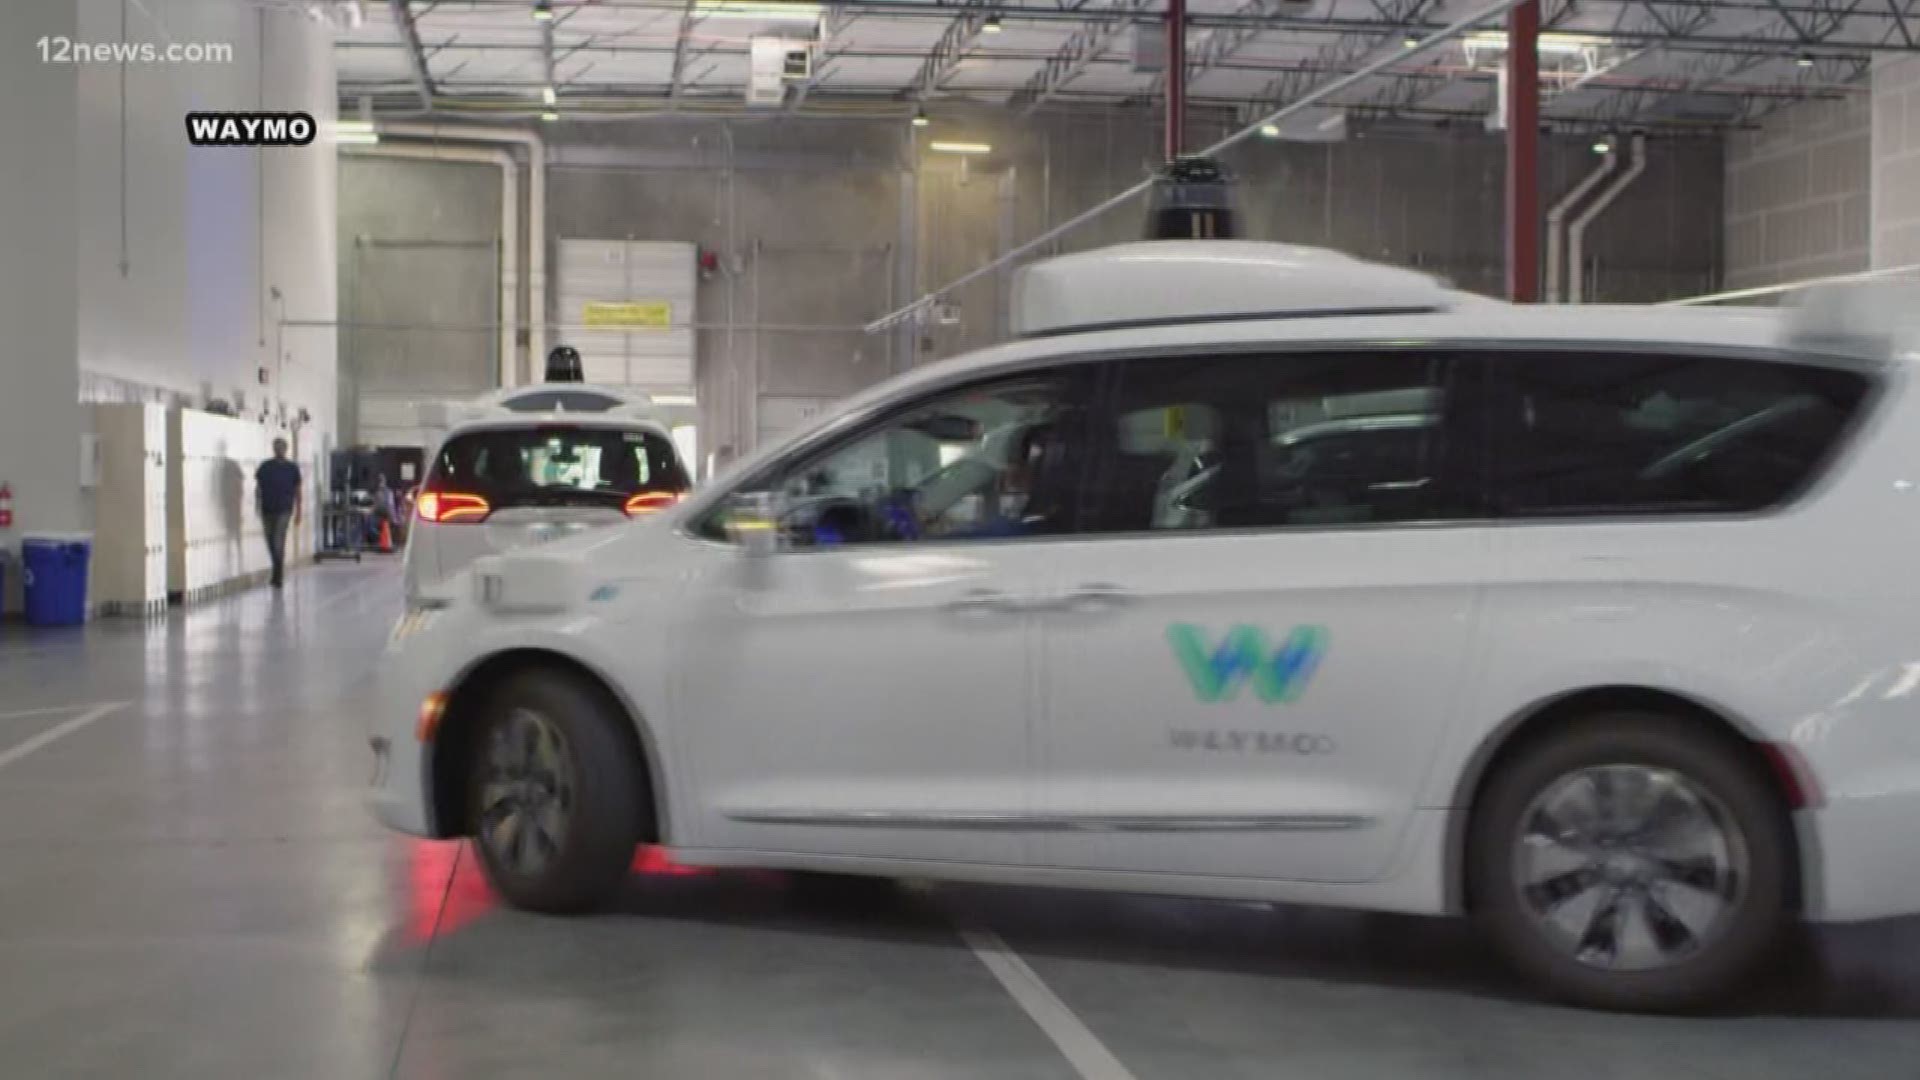 Waymo is taking another big step towards opening up self-driving car services to the general public. Waymo has been testing their driverless cars for two years right here in the Valley, and they talk to 12 News about their next step.